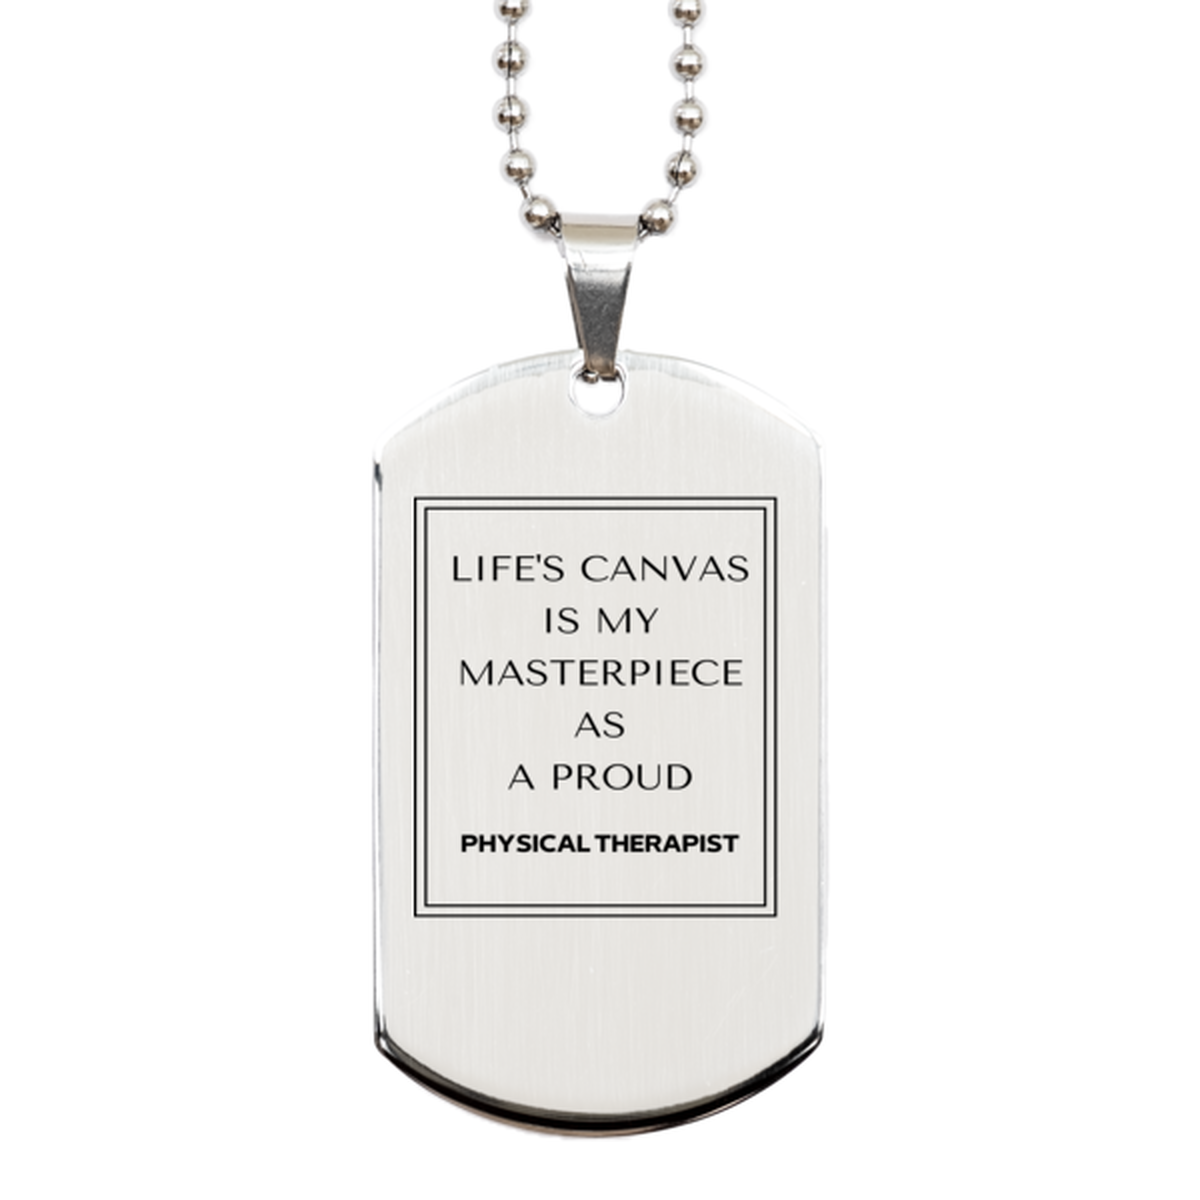 Proud Physical Therapist Gifts, Life's canvas is my masterpiece, Epic Birthday Christmas Unique Silver Dog Tag For Physical Therapist, Coworkers, Men, Women, Friends